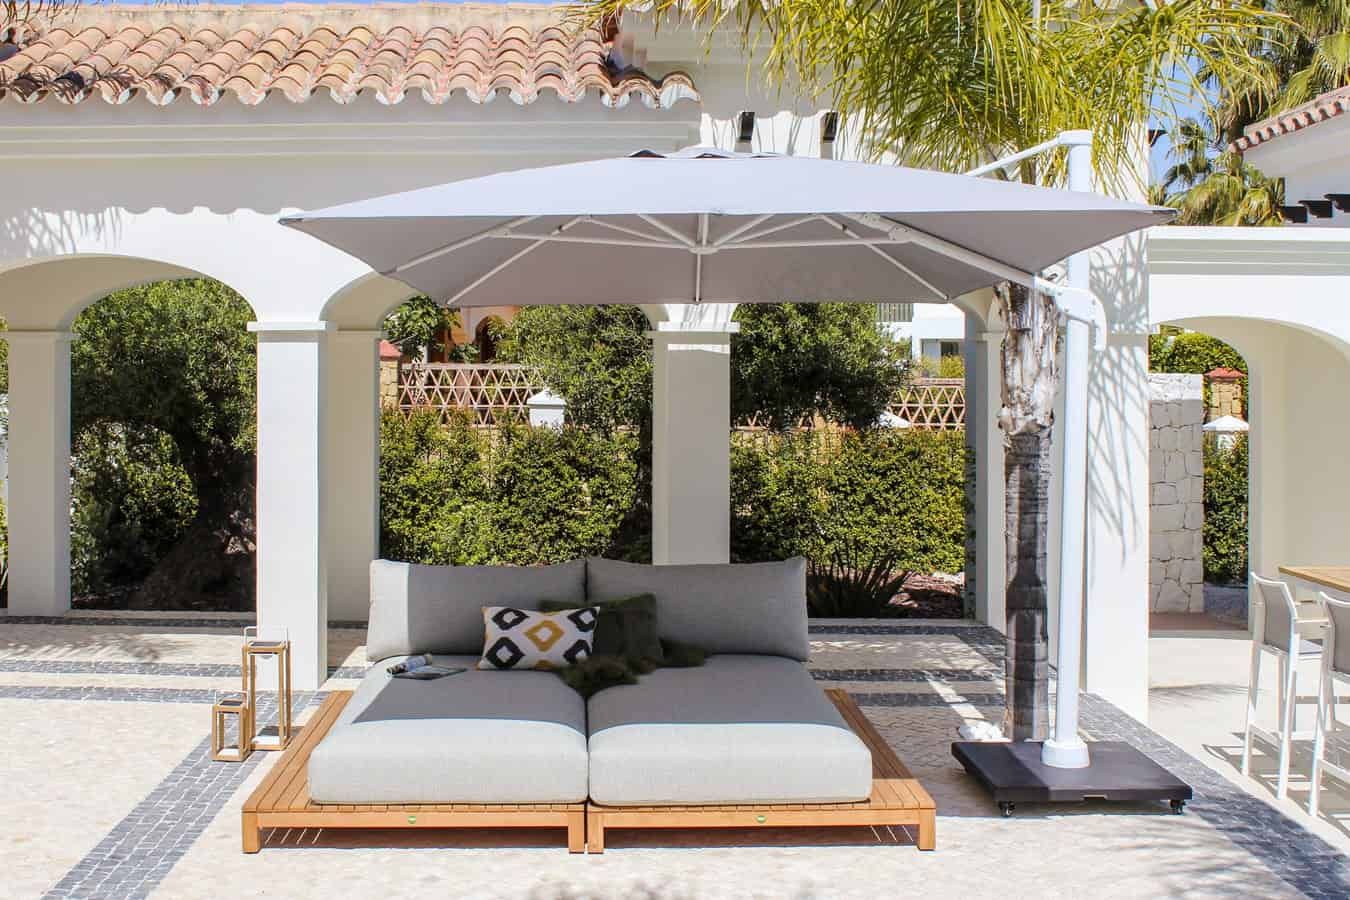 Builded with First-Class Material: SunsLifestyle Pantalla SUNS Lifestyle Modern garden Furniture